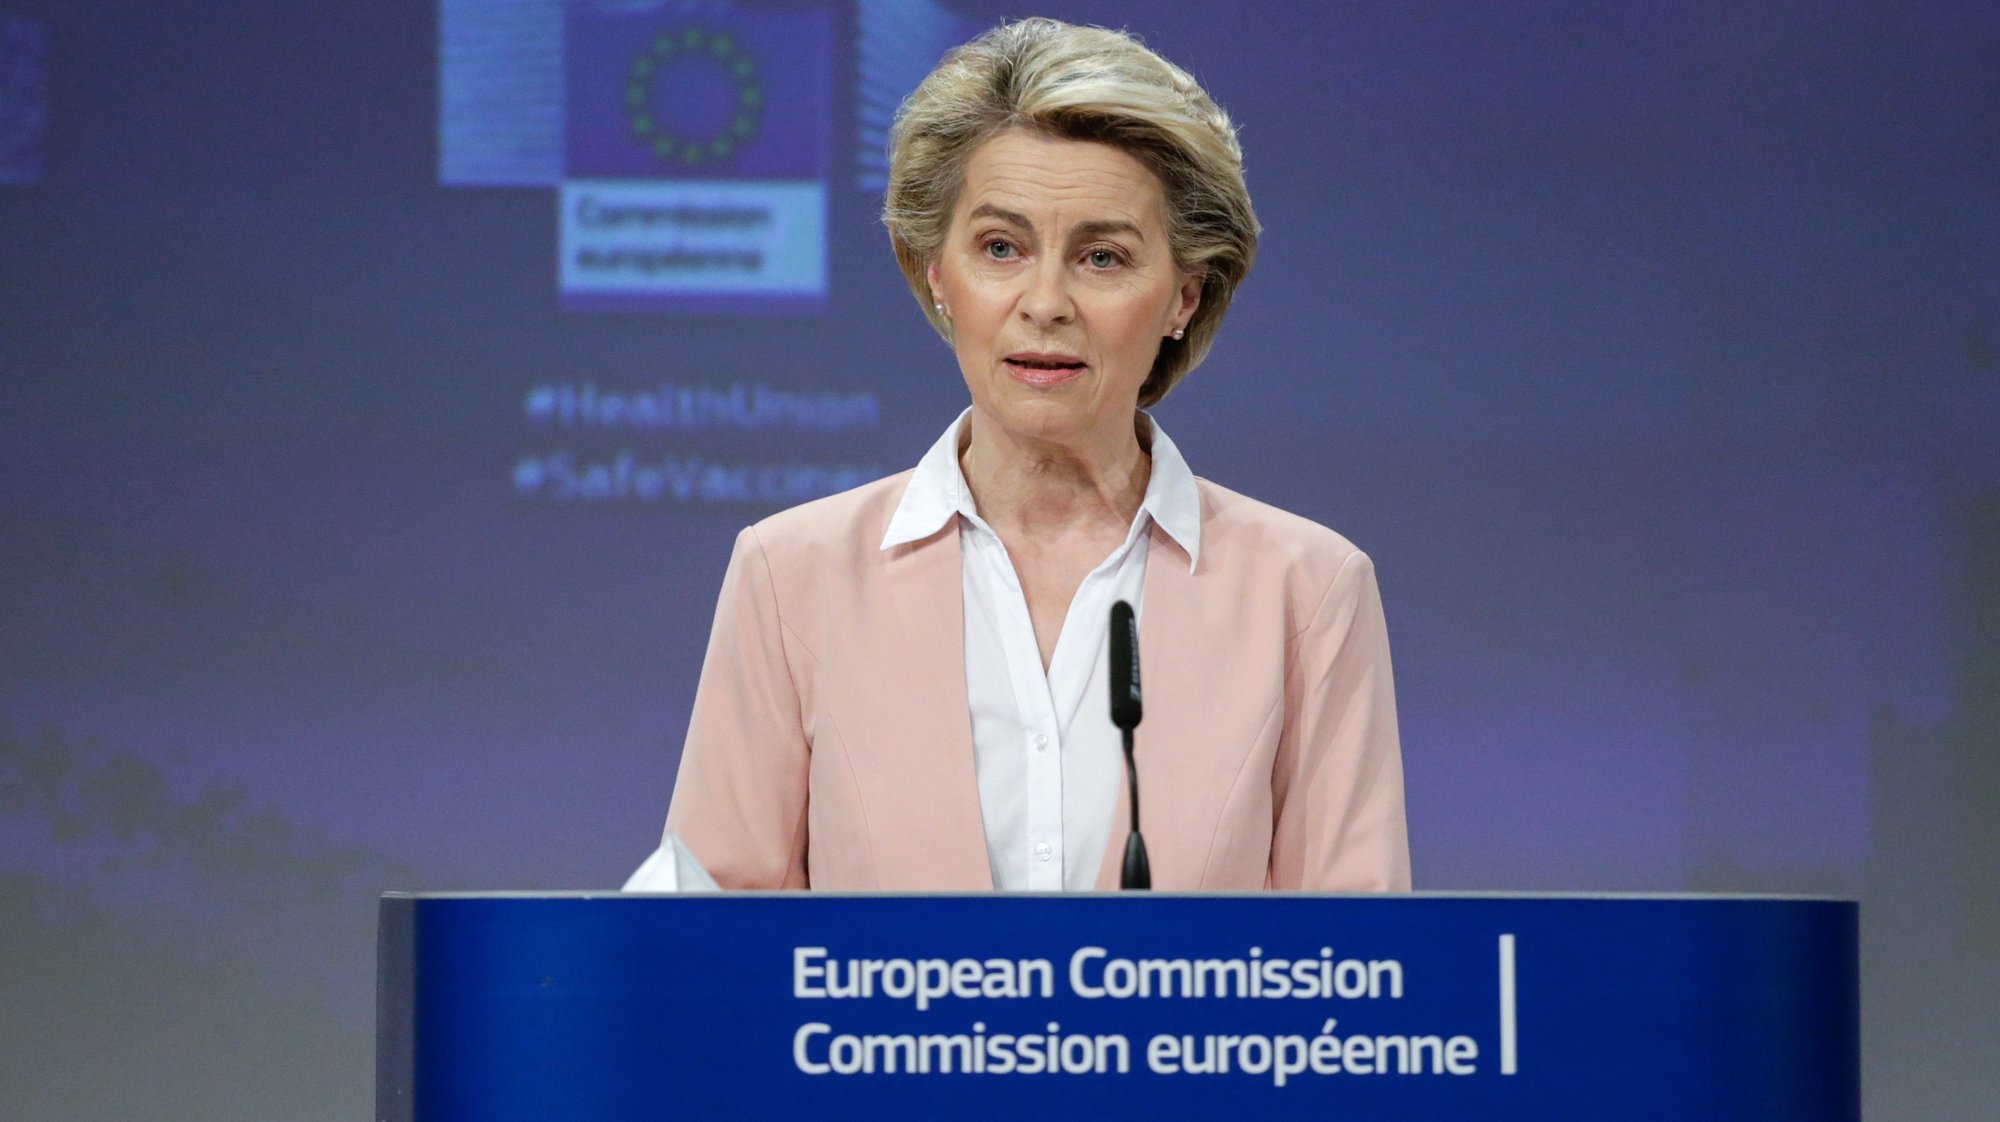 epa09018447 European Commission President Ursula von der Leyen gives a press conference on the HERA Incubator to anticipate the threat of the coronavirus variants at the European Commission Headquarters in Brussels, Belgium, 17 February 2021.  EPA/ARIS OIKONOMOU / POOL